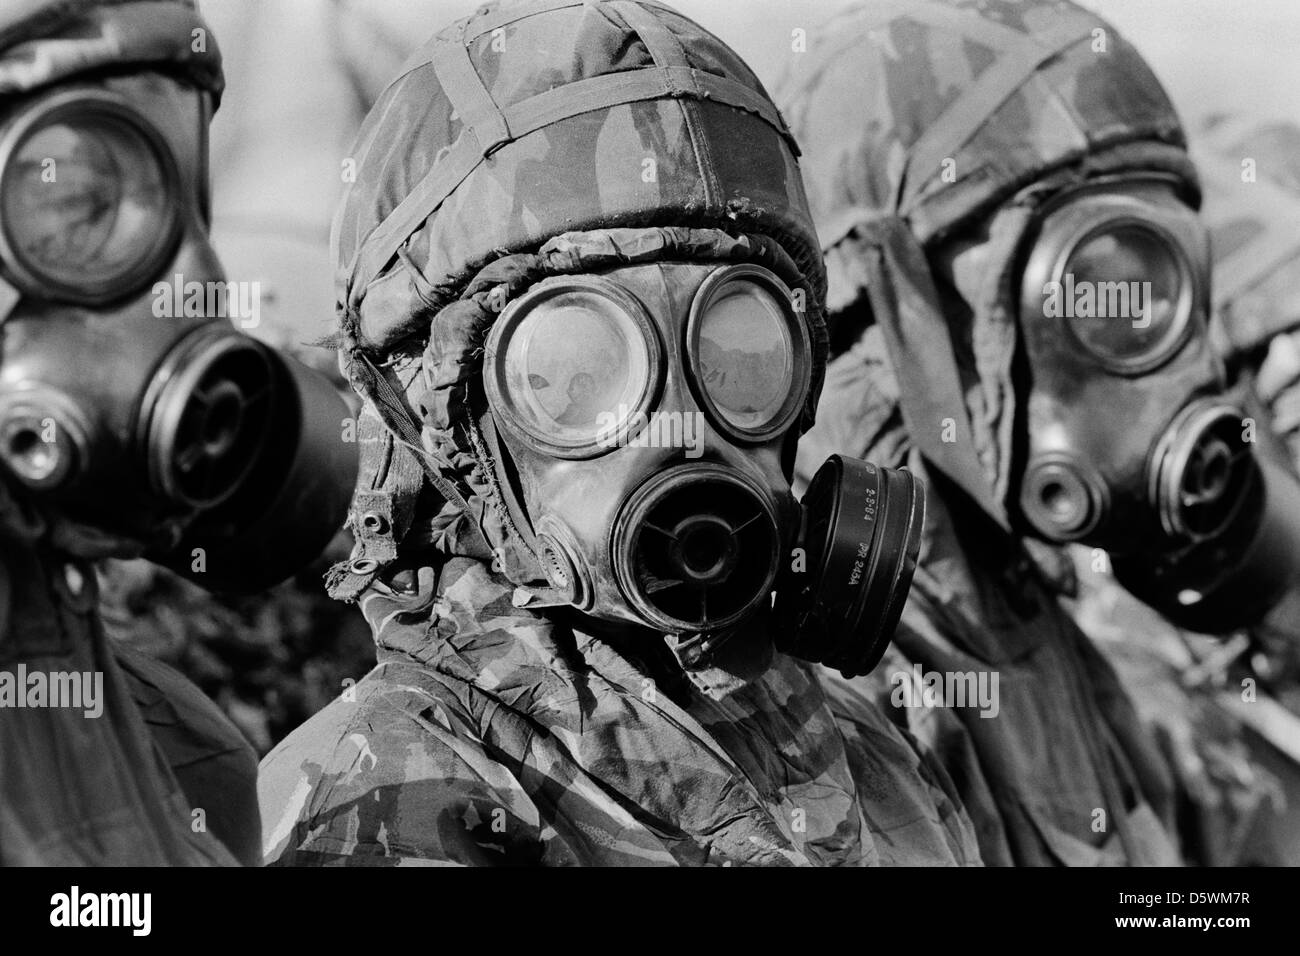 British soldiers wearing nbc protective gear undergo training for a gas attack during an exercise. Stock Photo